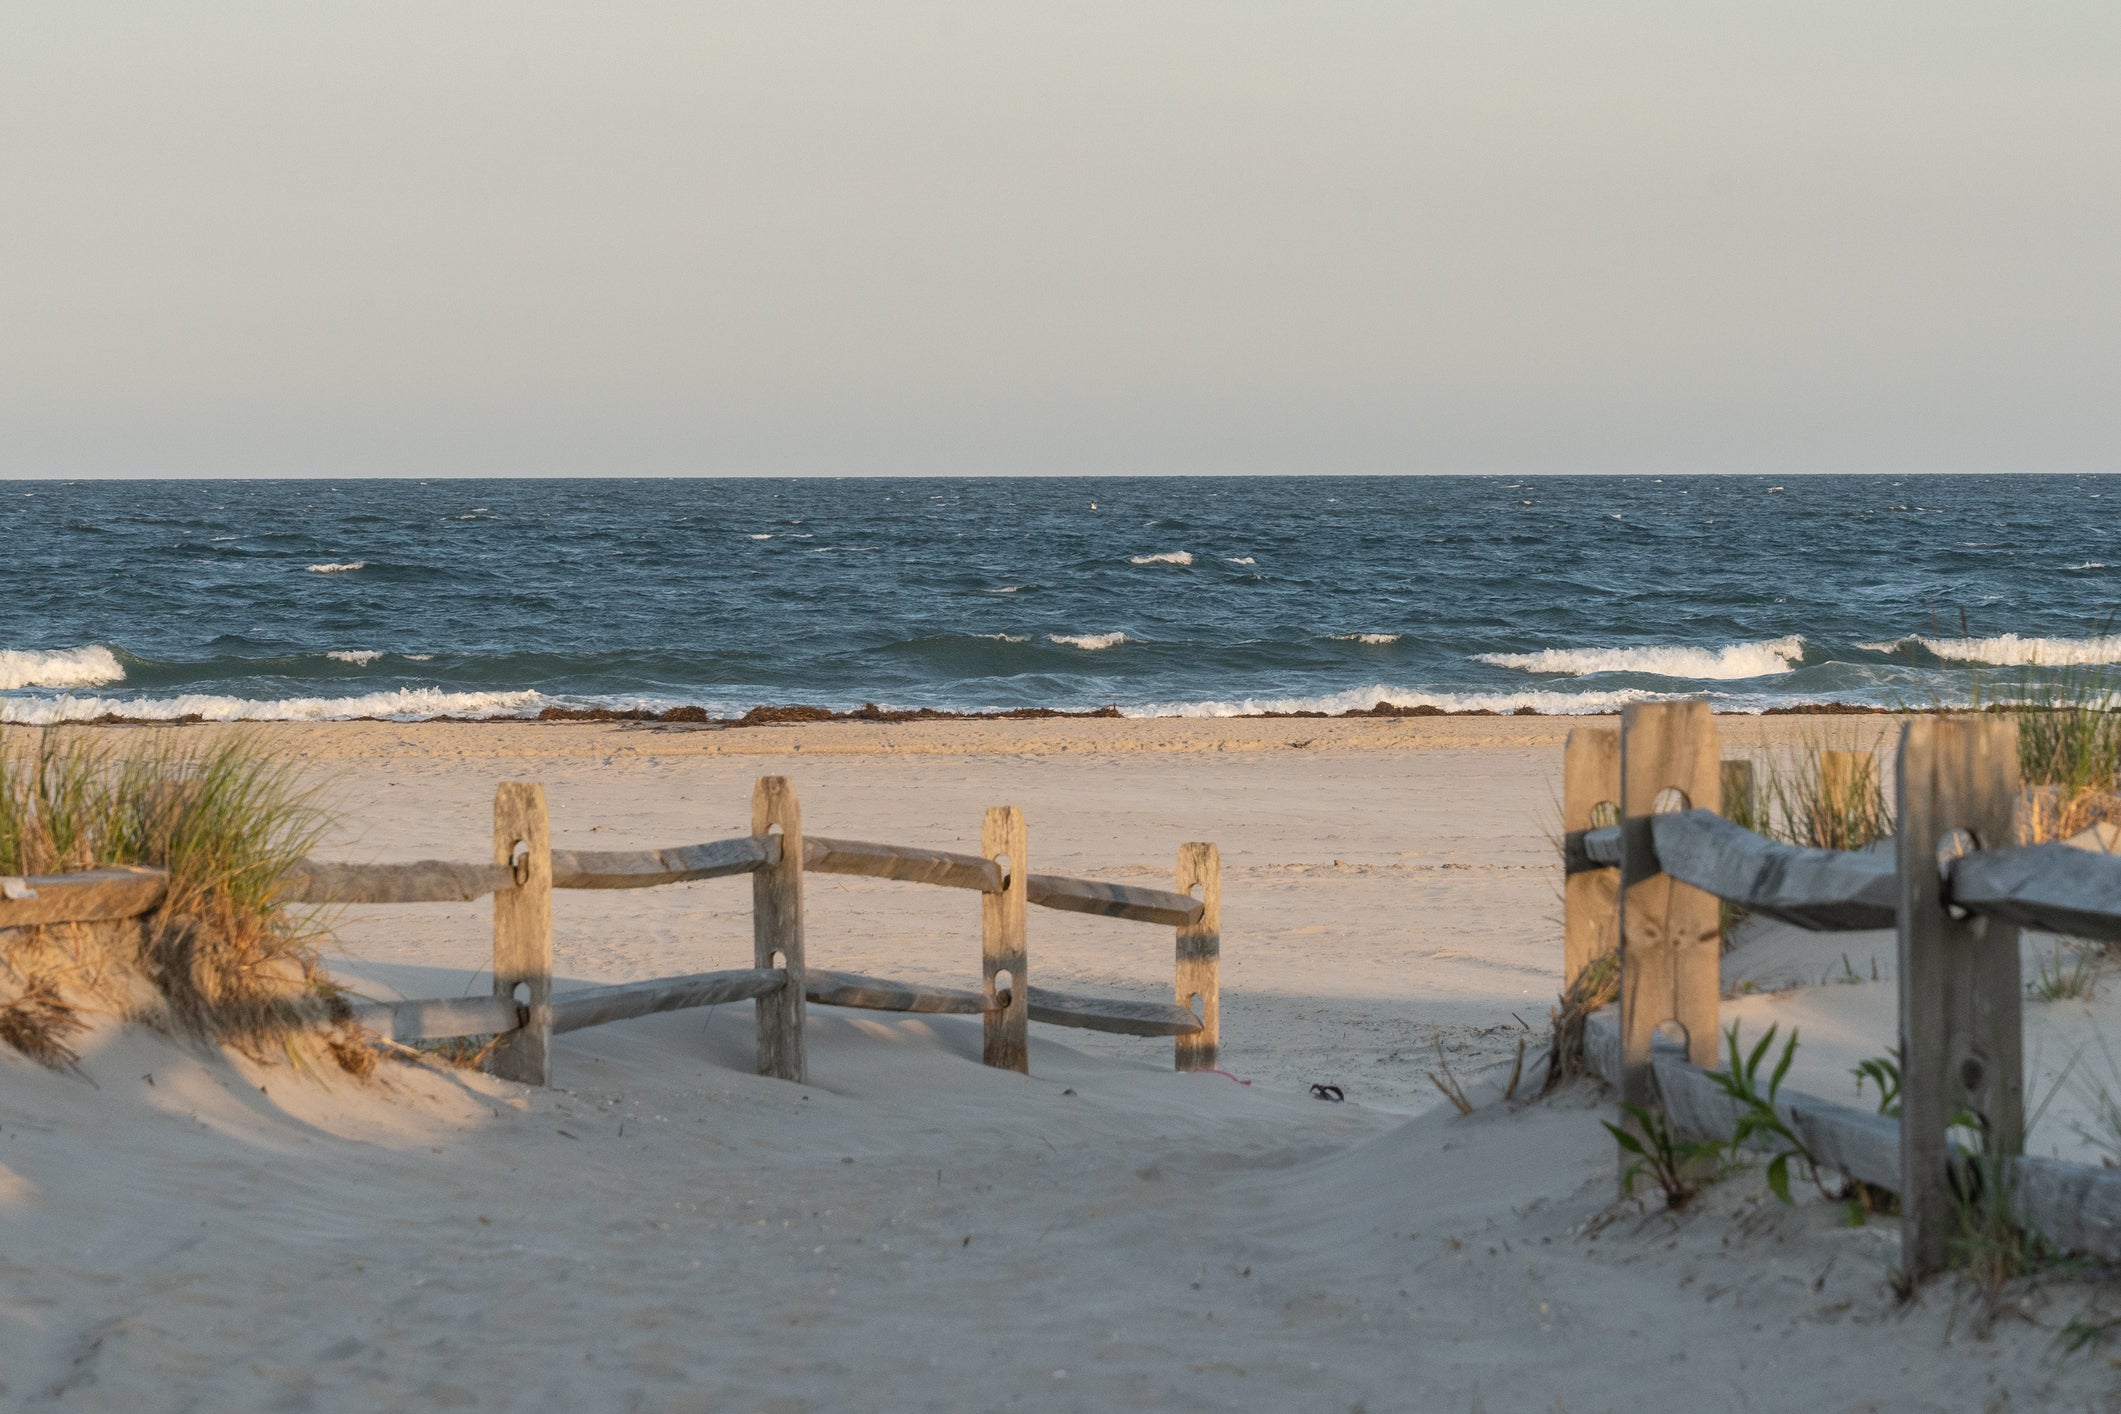 New Jersey has more to offer than ‘Jersey Shore’